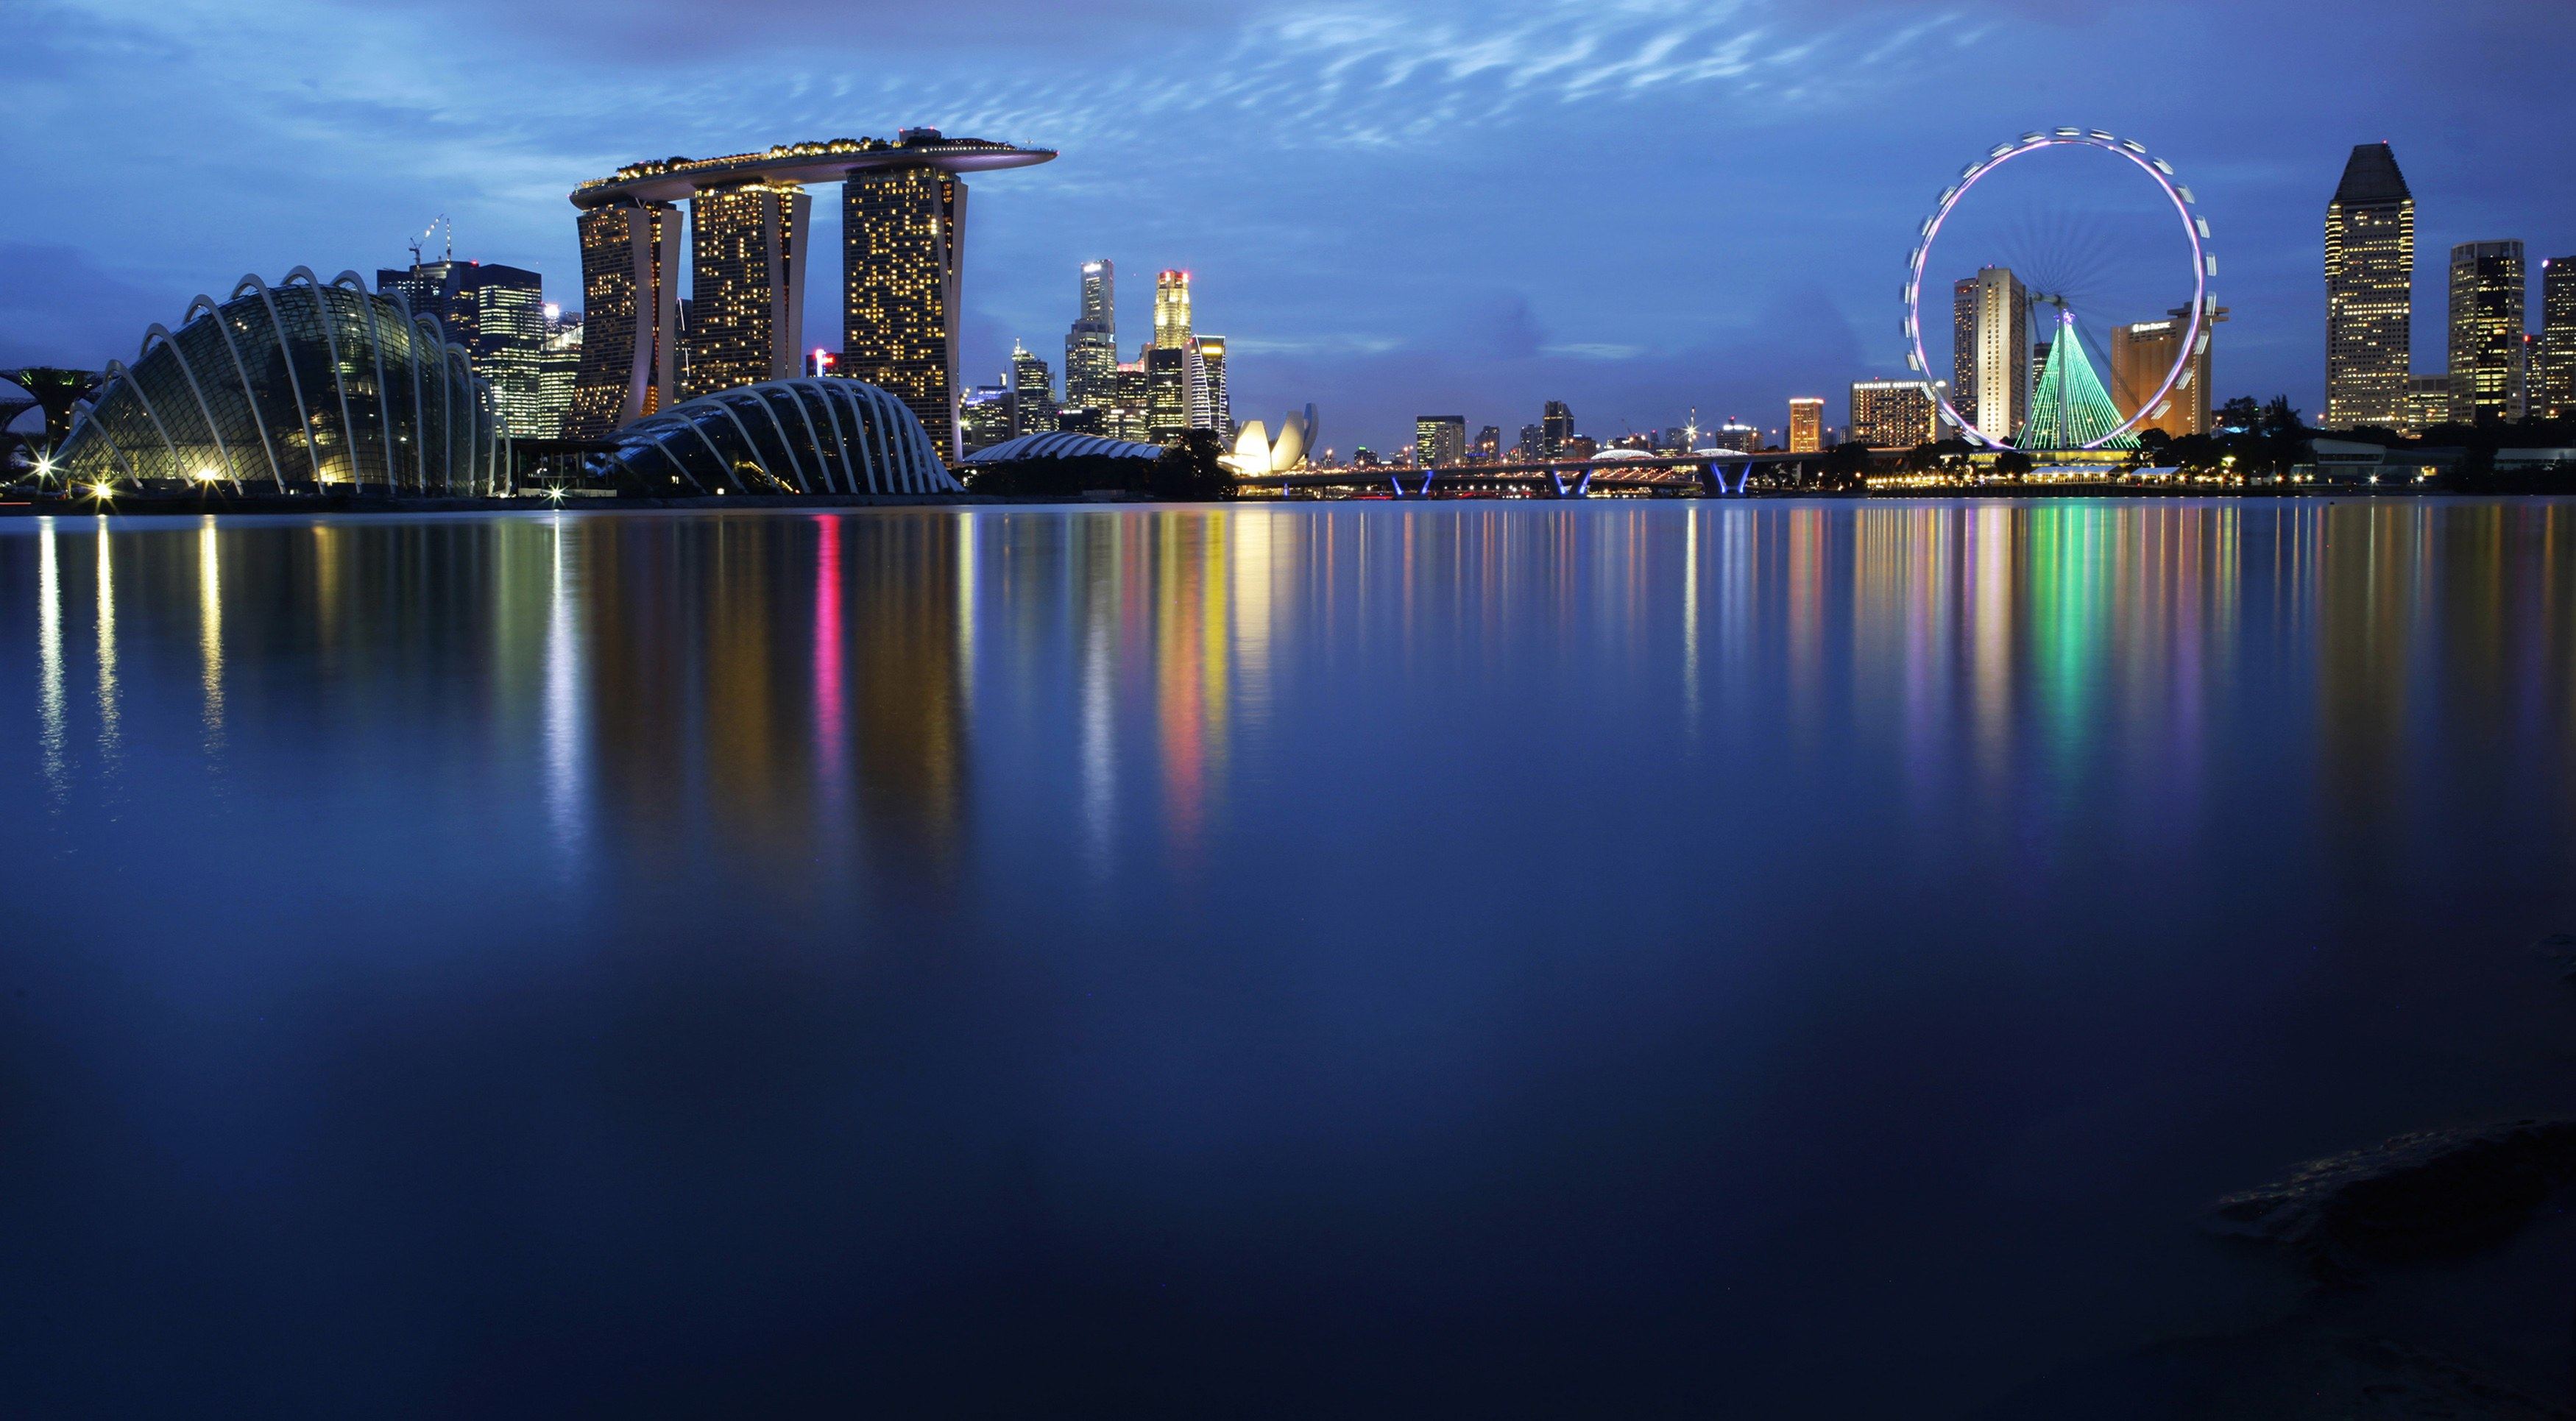 Lights of Singapore’s skyline and Marina Bay are reflected in the waters of the Marina Barrage. Photo: Reuters